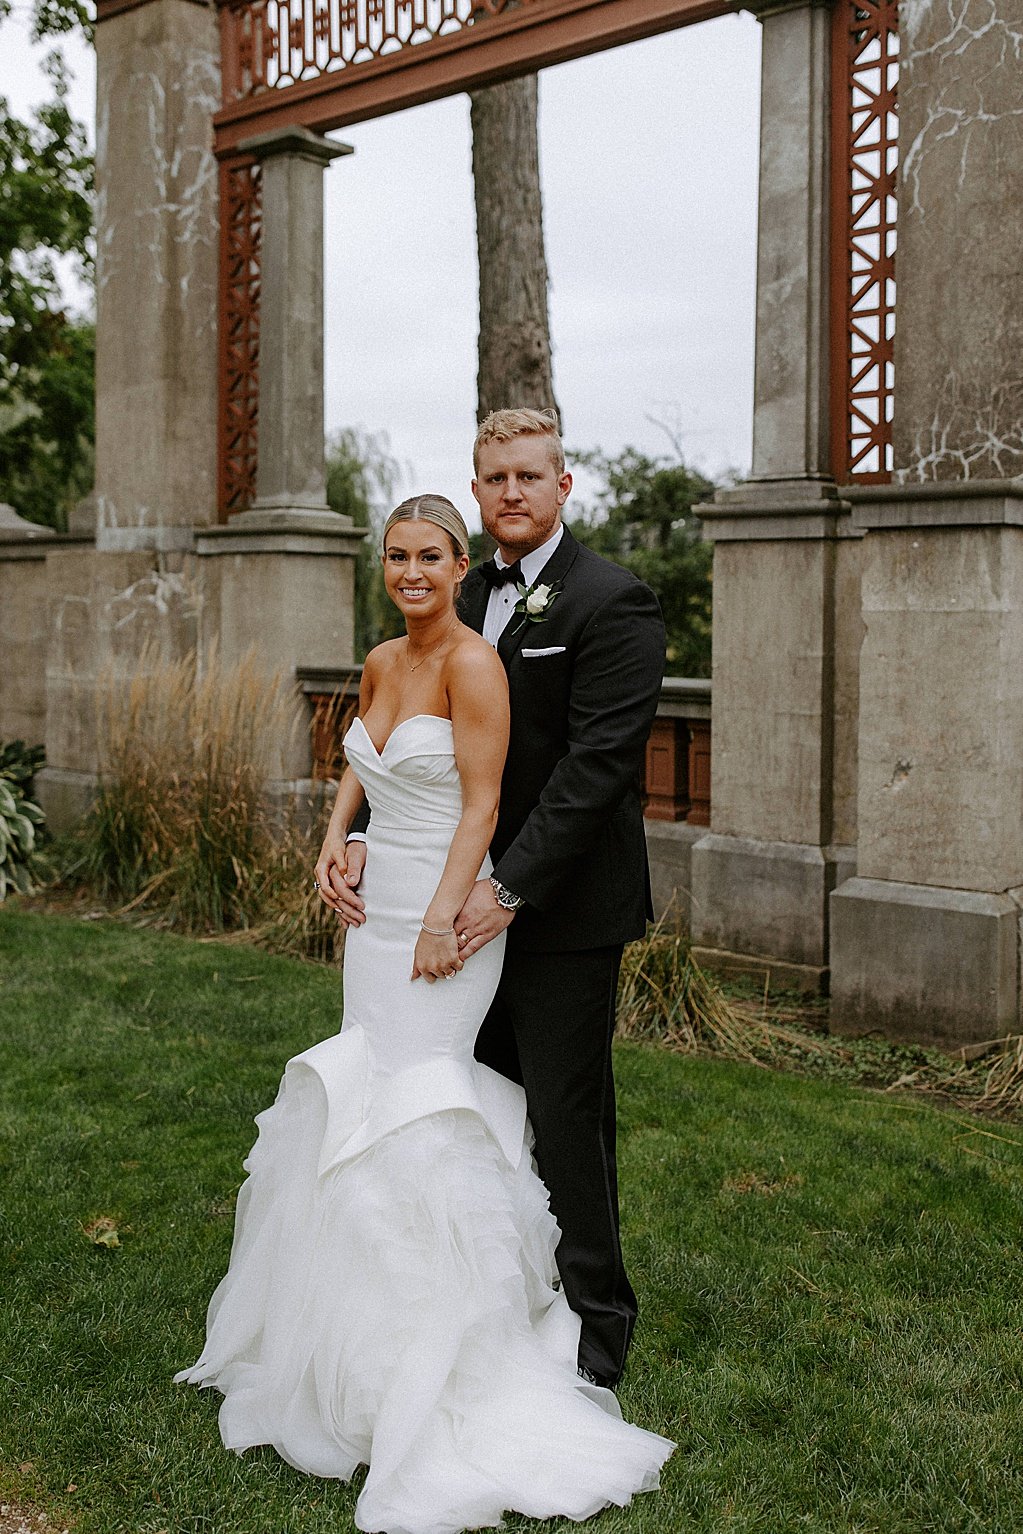 The Armour House Lake Forest Wedding Venue, Lake Forest Illinois Wedding Venues, Lake Forest wedding photographer, chicago wedding photographer